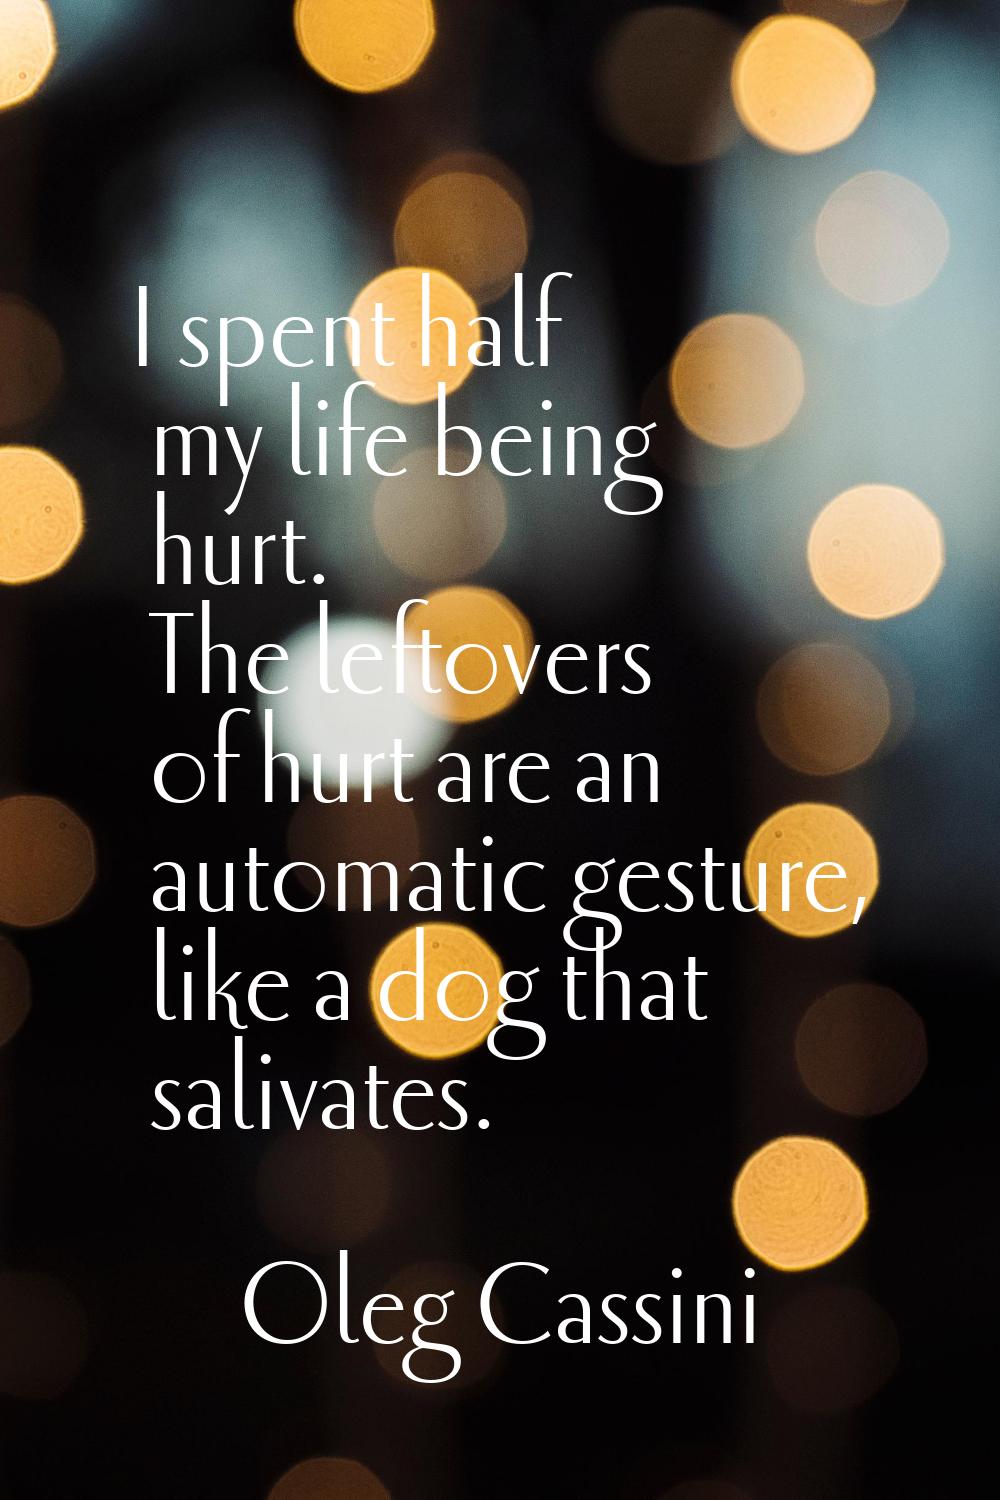 I spent half my life being hurt. The leftovers of hurt are an automatic gesture, like a dog that sa